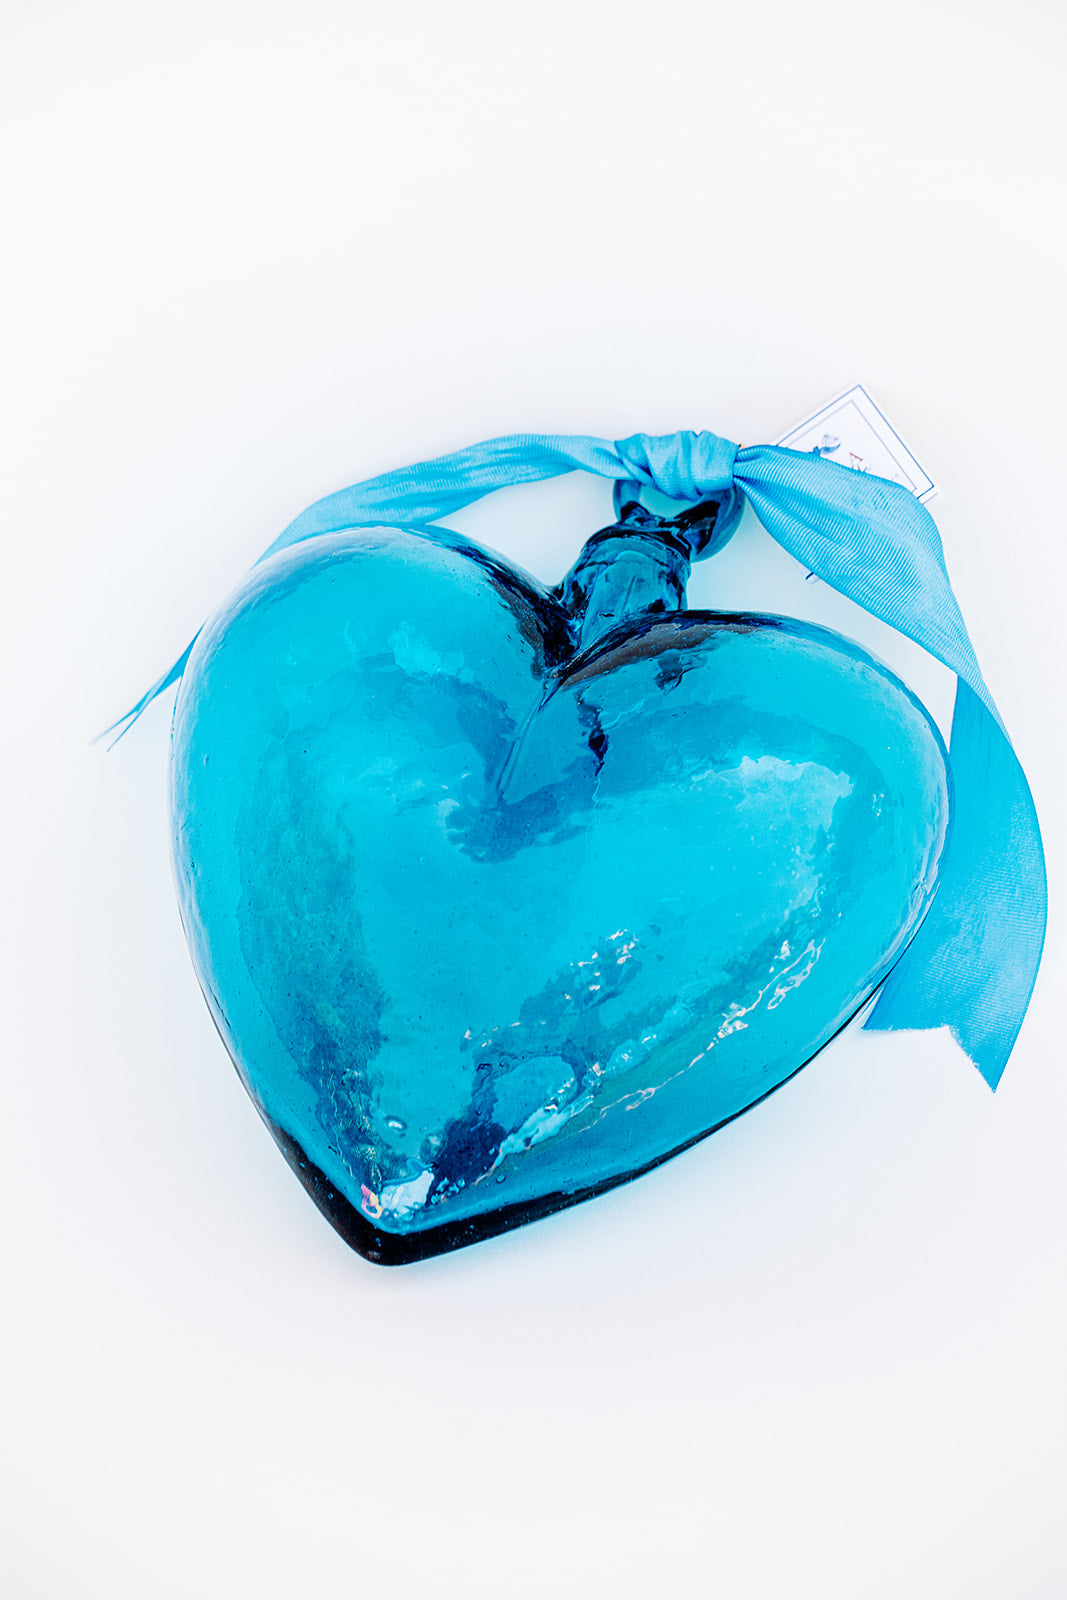 10 Blown Glass Hearts. Glass Heart, BLOWN GLASS Made in Mexico 